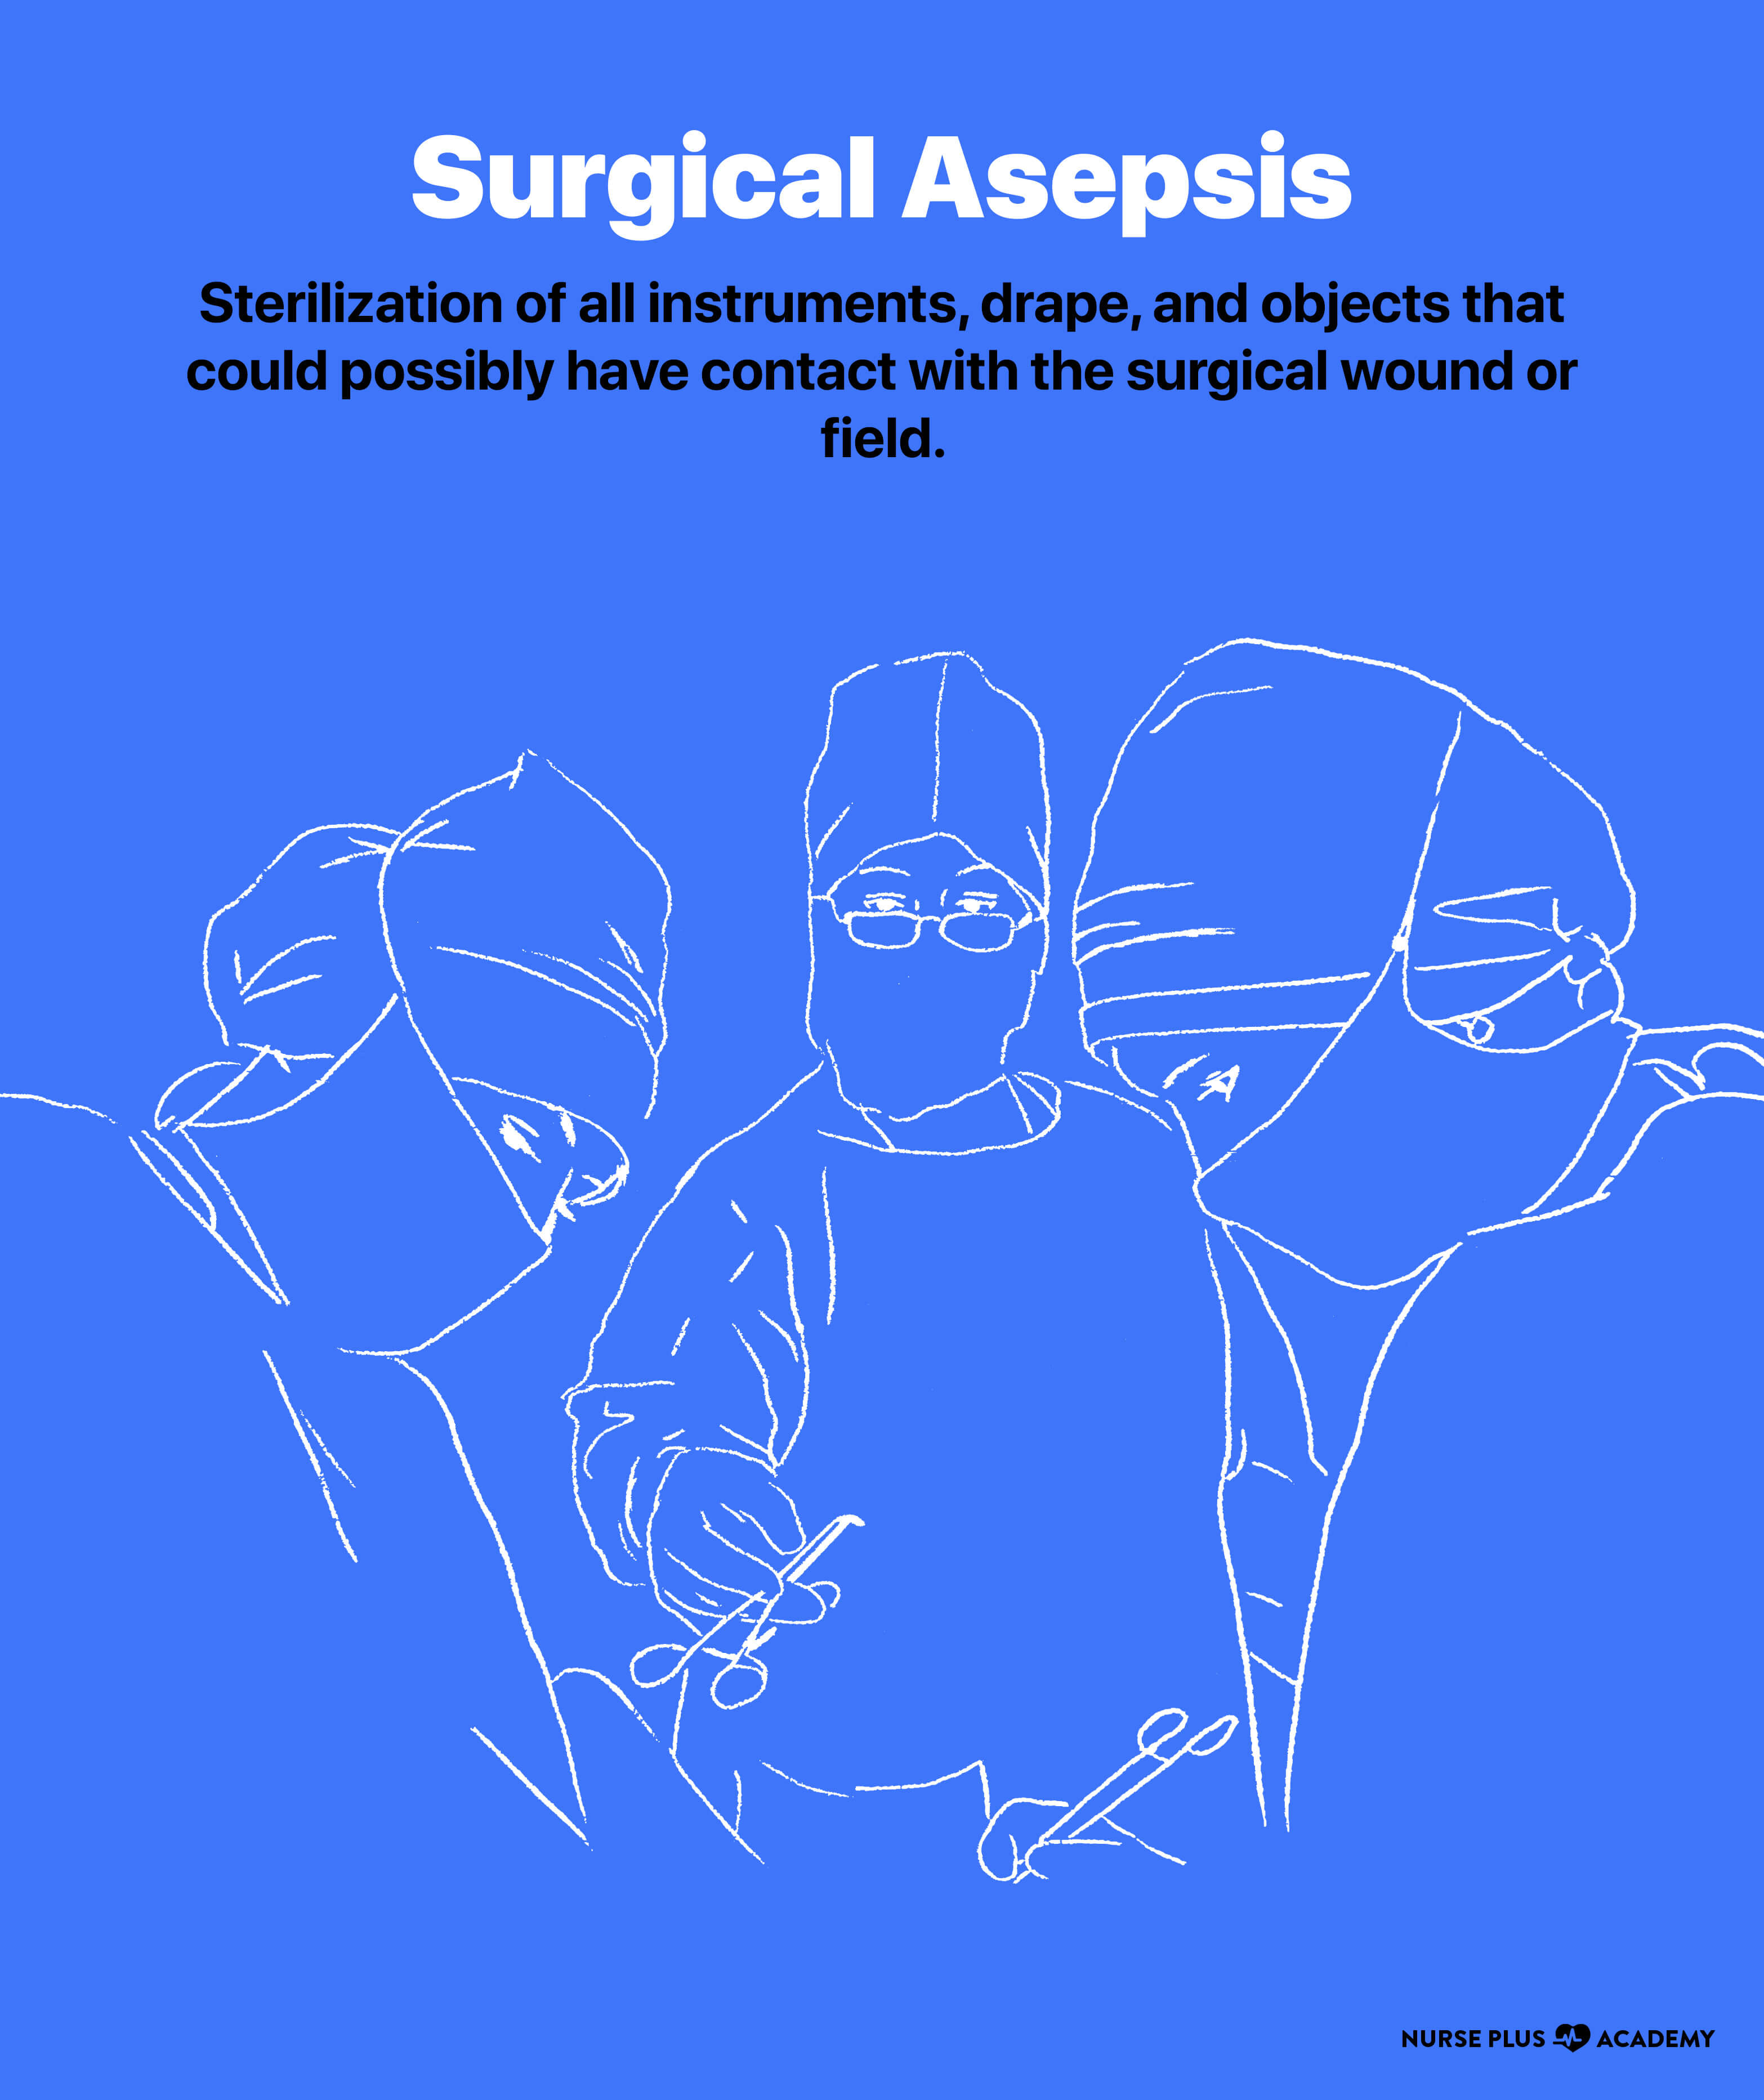 compare and contrast medical asepsis and surgical asepsis